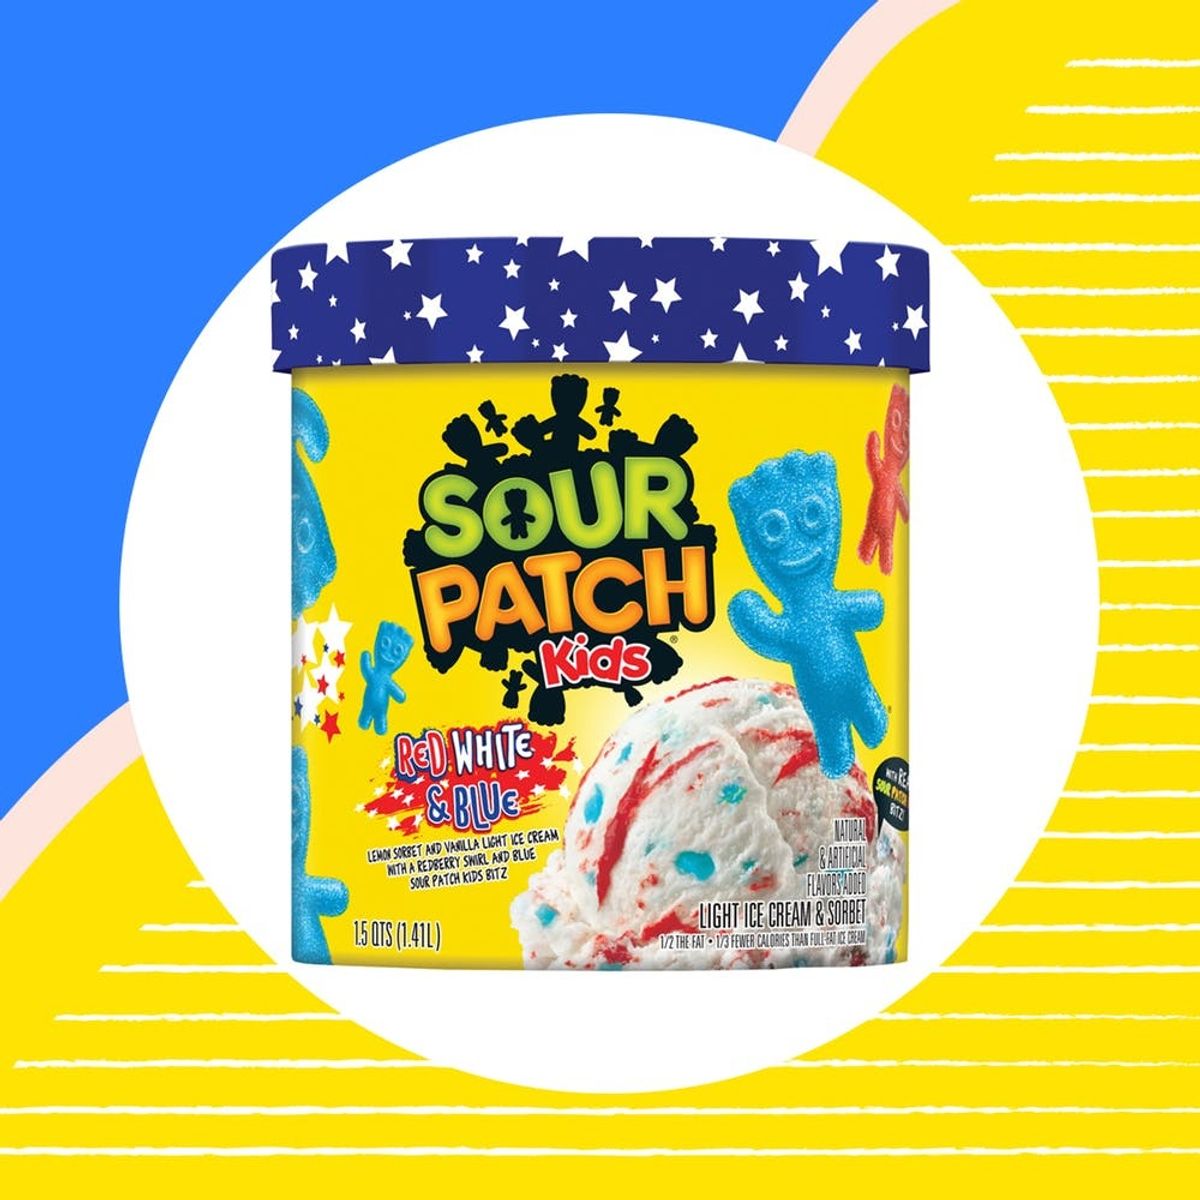 Sour Patch Kids Are Headed to the Frozen Foods Section in a Super COOL Way